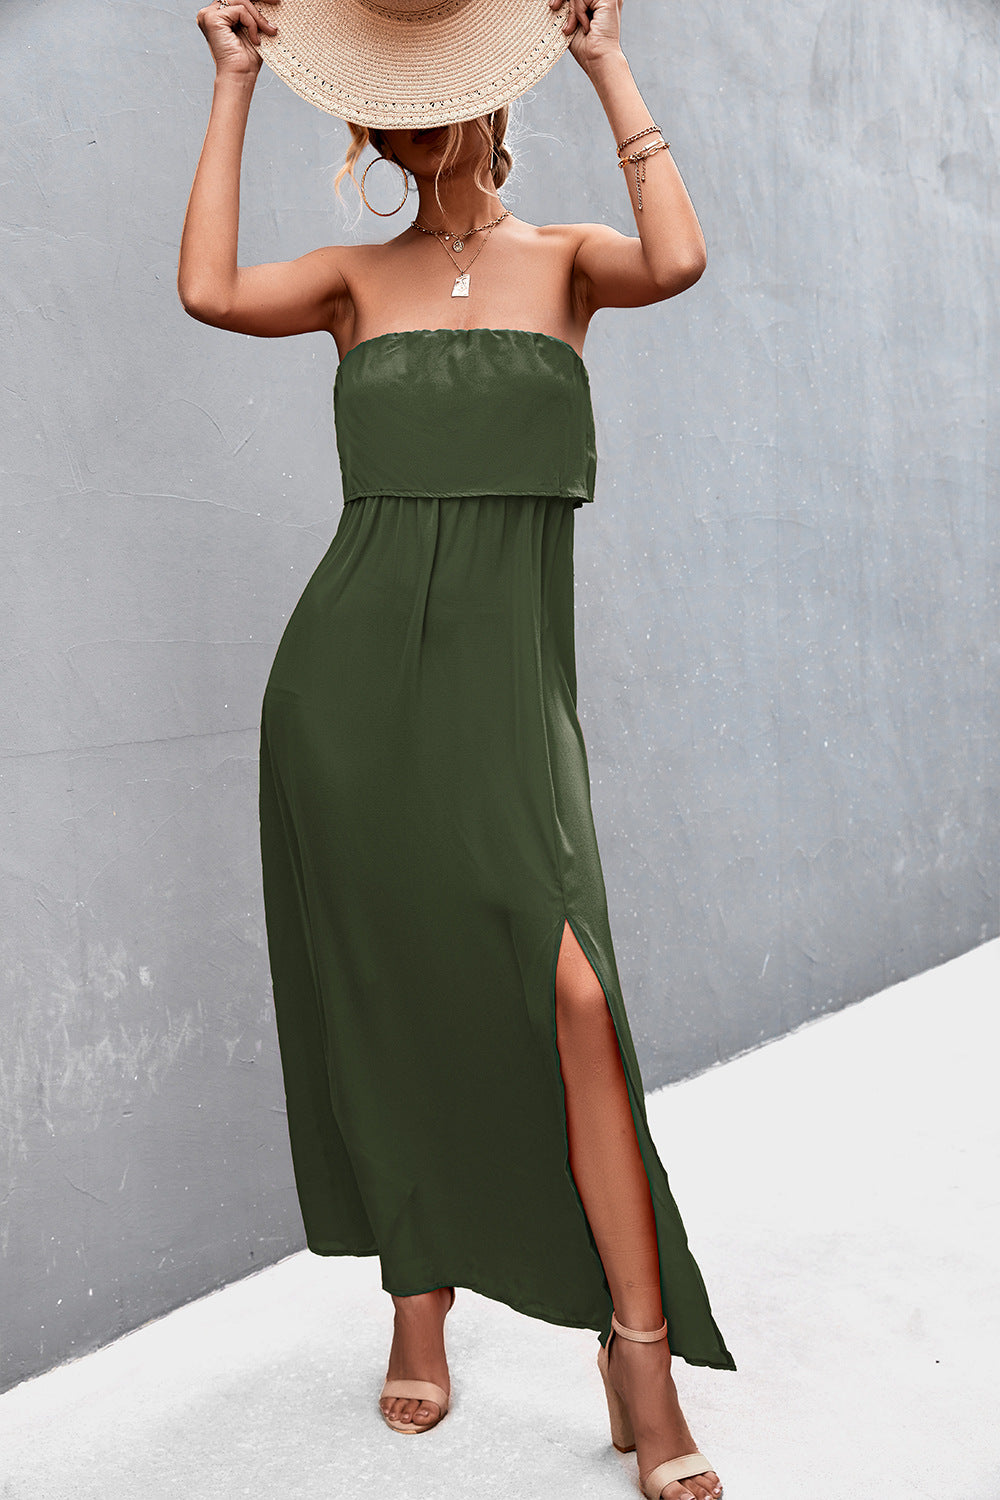 Sexy Strapless Summer Daily Dresses